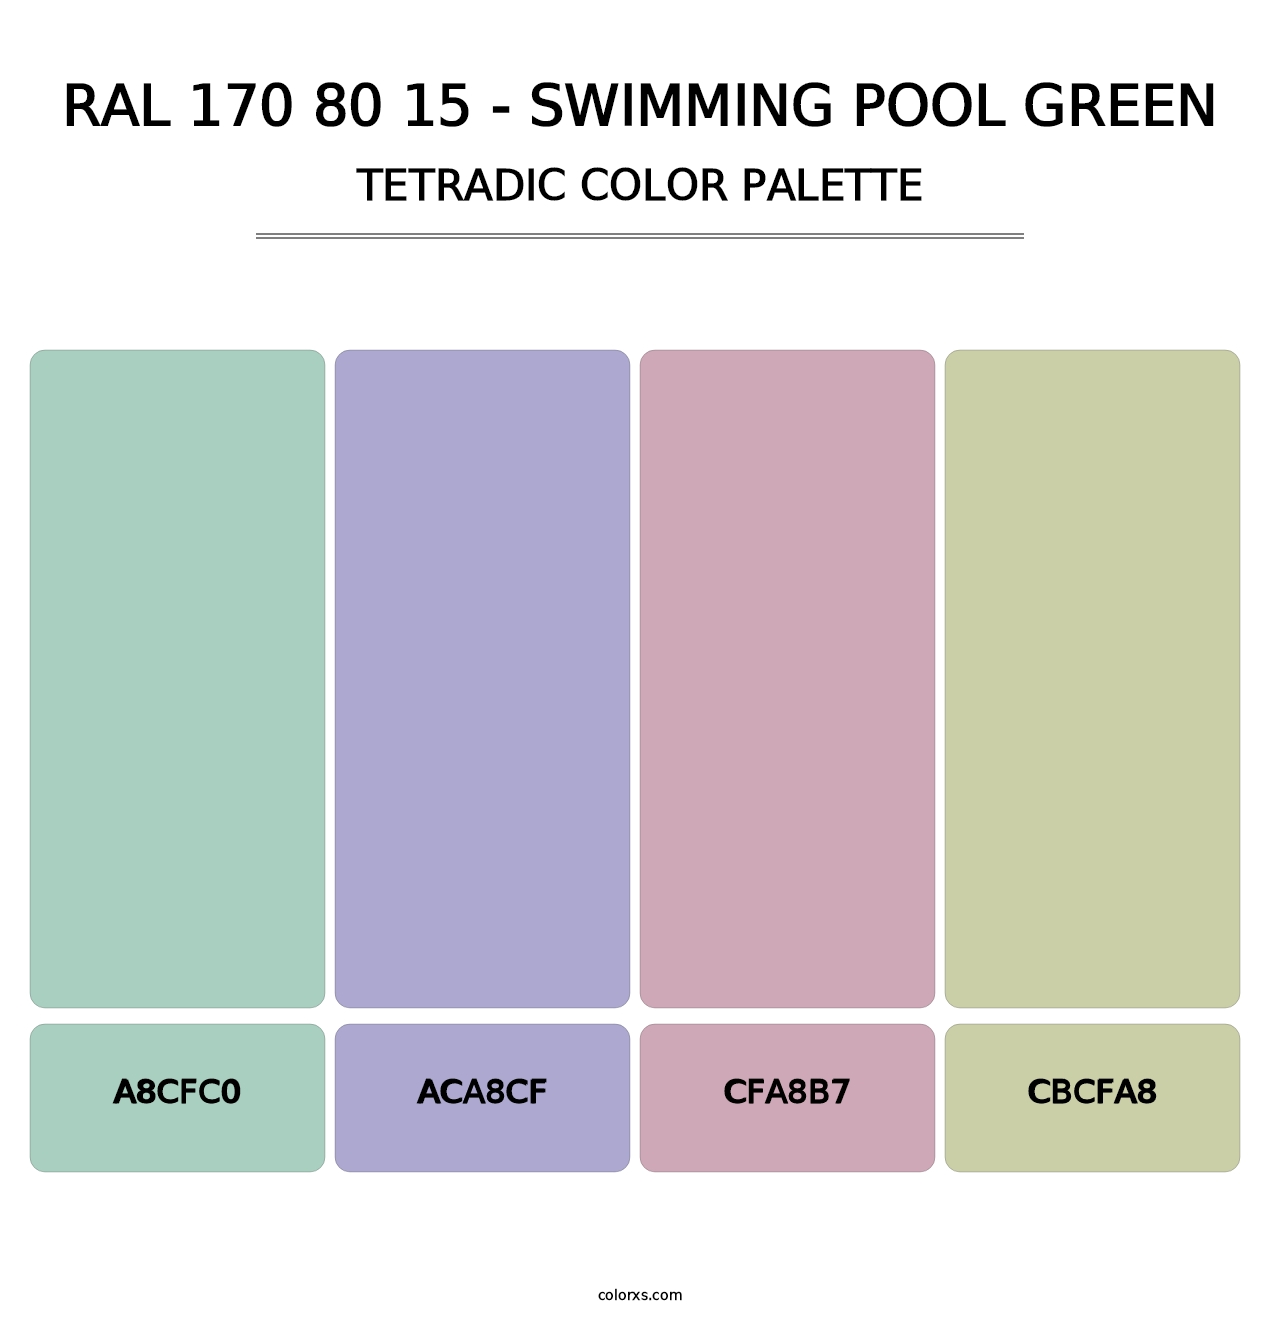 RAL 170 80 15 - Swimming Pool Green - Tetradic Color Palette